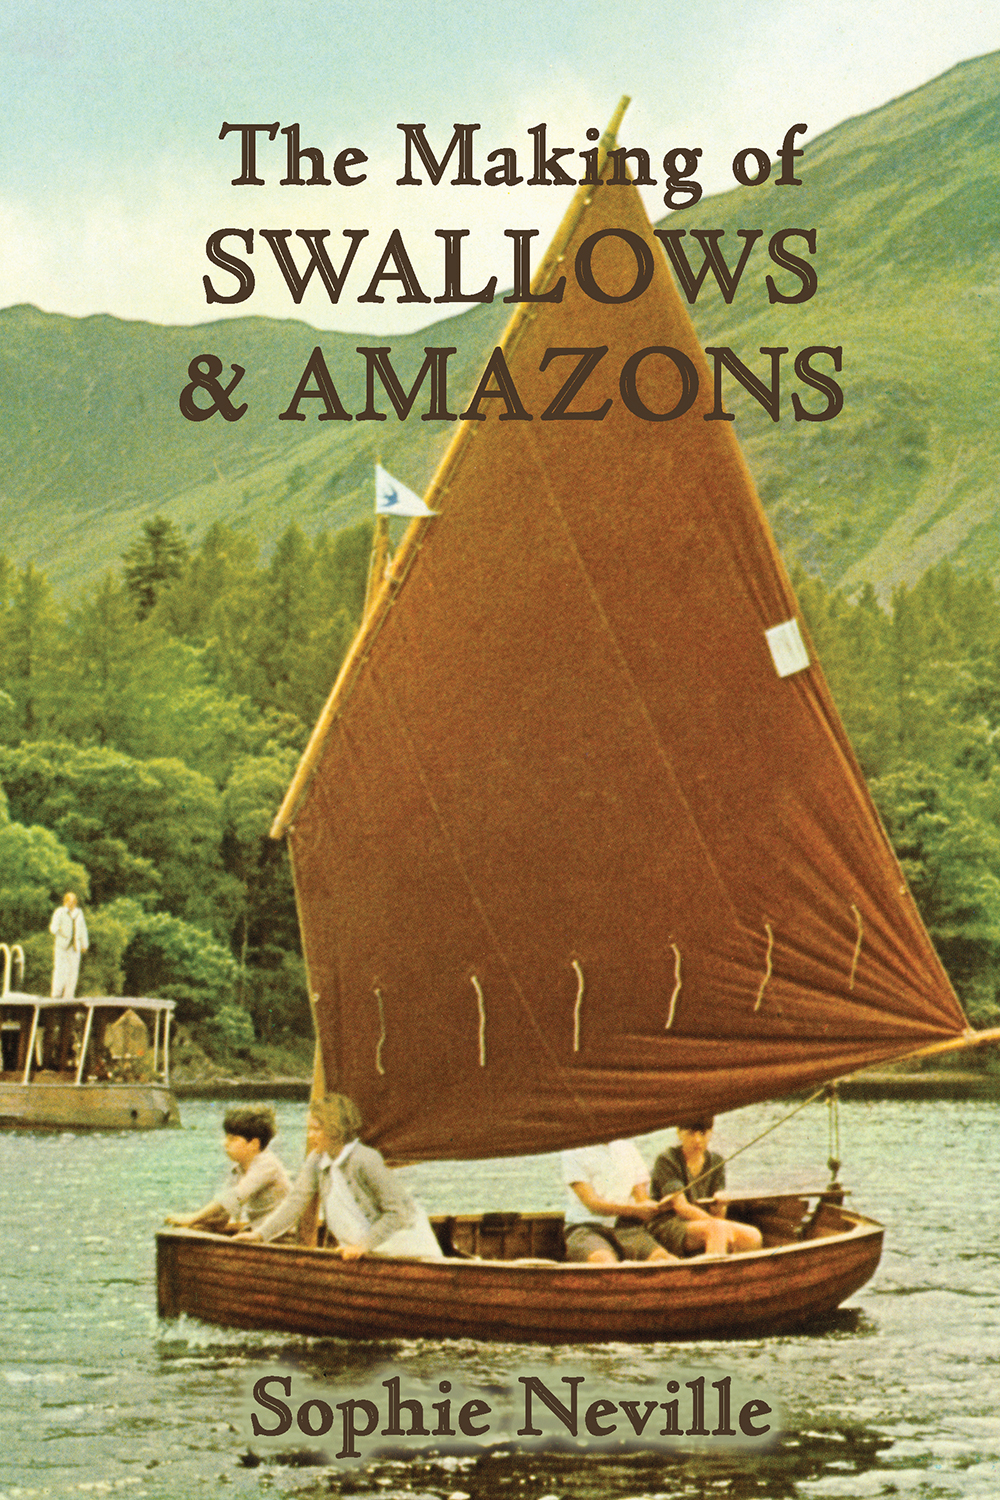 'The Making of SWALLOWS & AMAZONS' - Sophie Neville's amusing memoir of filming on location in the English Lake District in 1973 published by Classic TV Press - August 2014